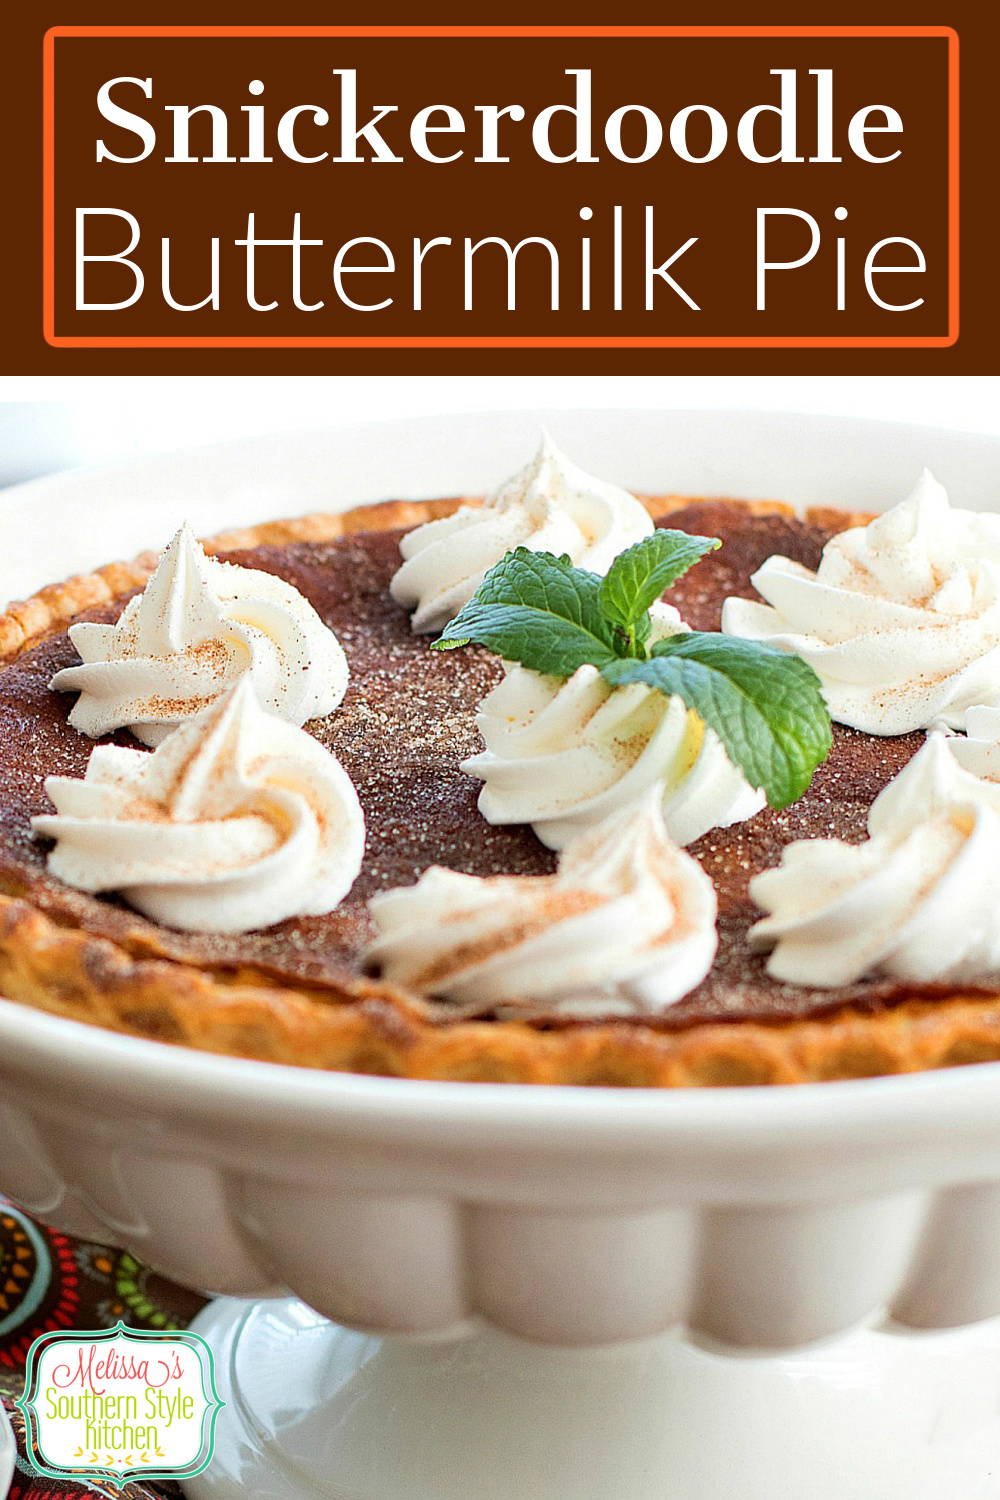 Two classic desserts collide in this sweet and spicy Snickerdoodle Buttermilk Pie #snickerdoodlepie #snickerdoodles #buttermilkpie #southernrecipes #desserts #dessertfoodrecipes #snickerdoodles #cinnamon #pies #holidayrecipes #thanksgivingpies #fallbaking #buttermilkpie via @melissasssk